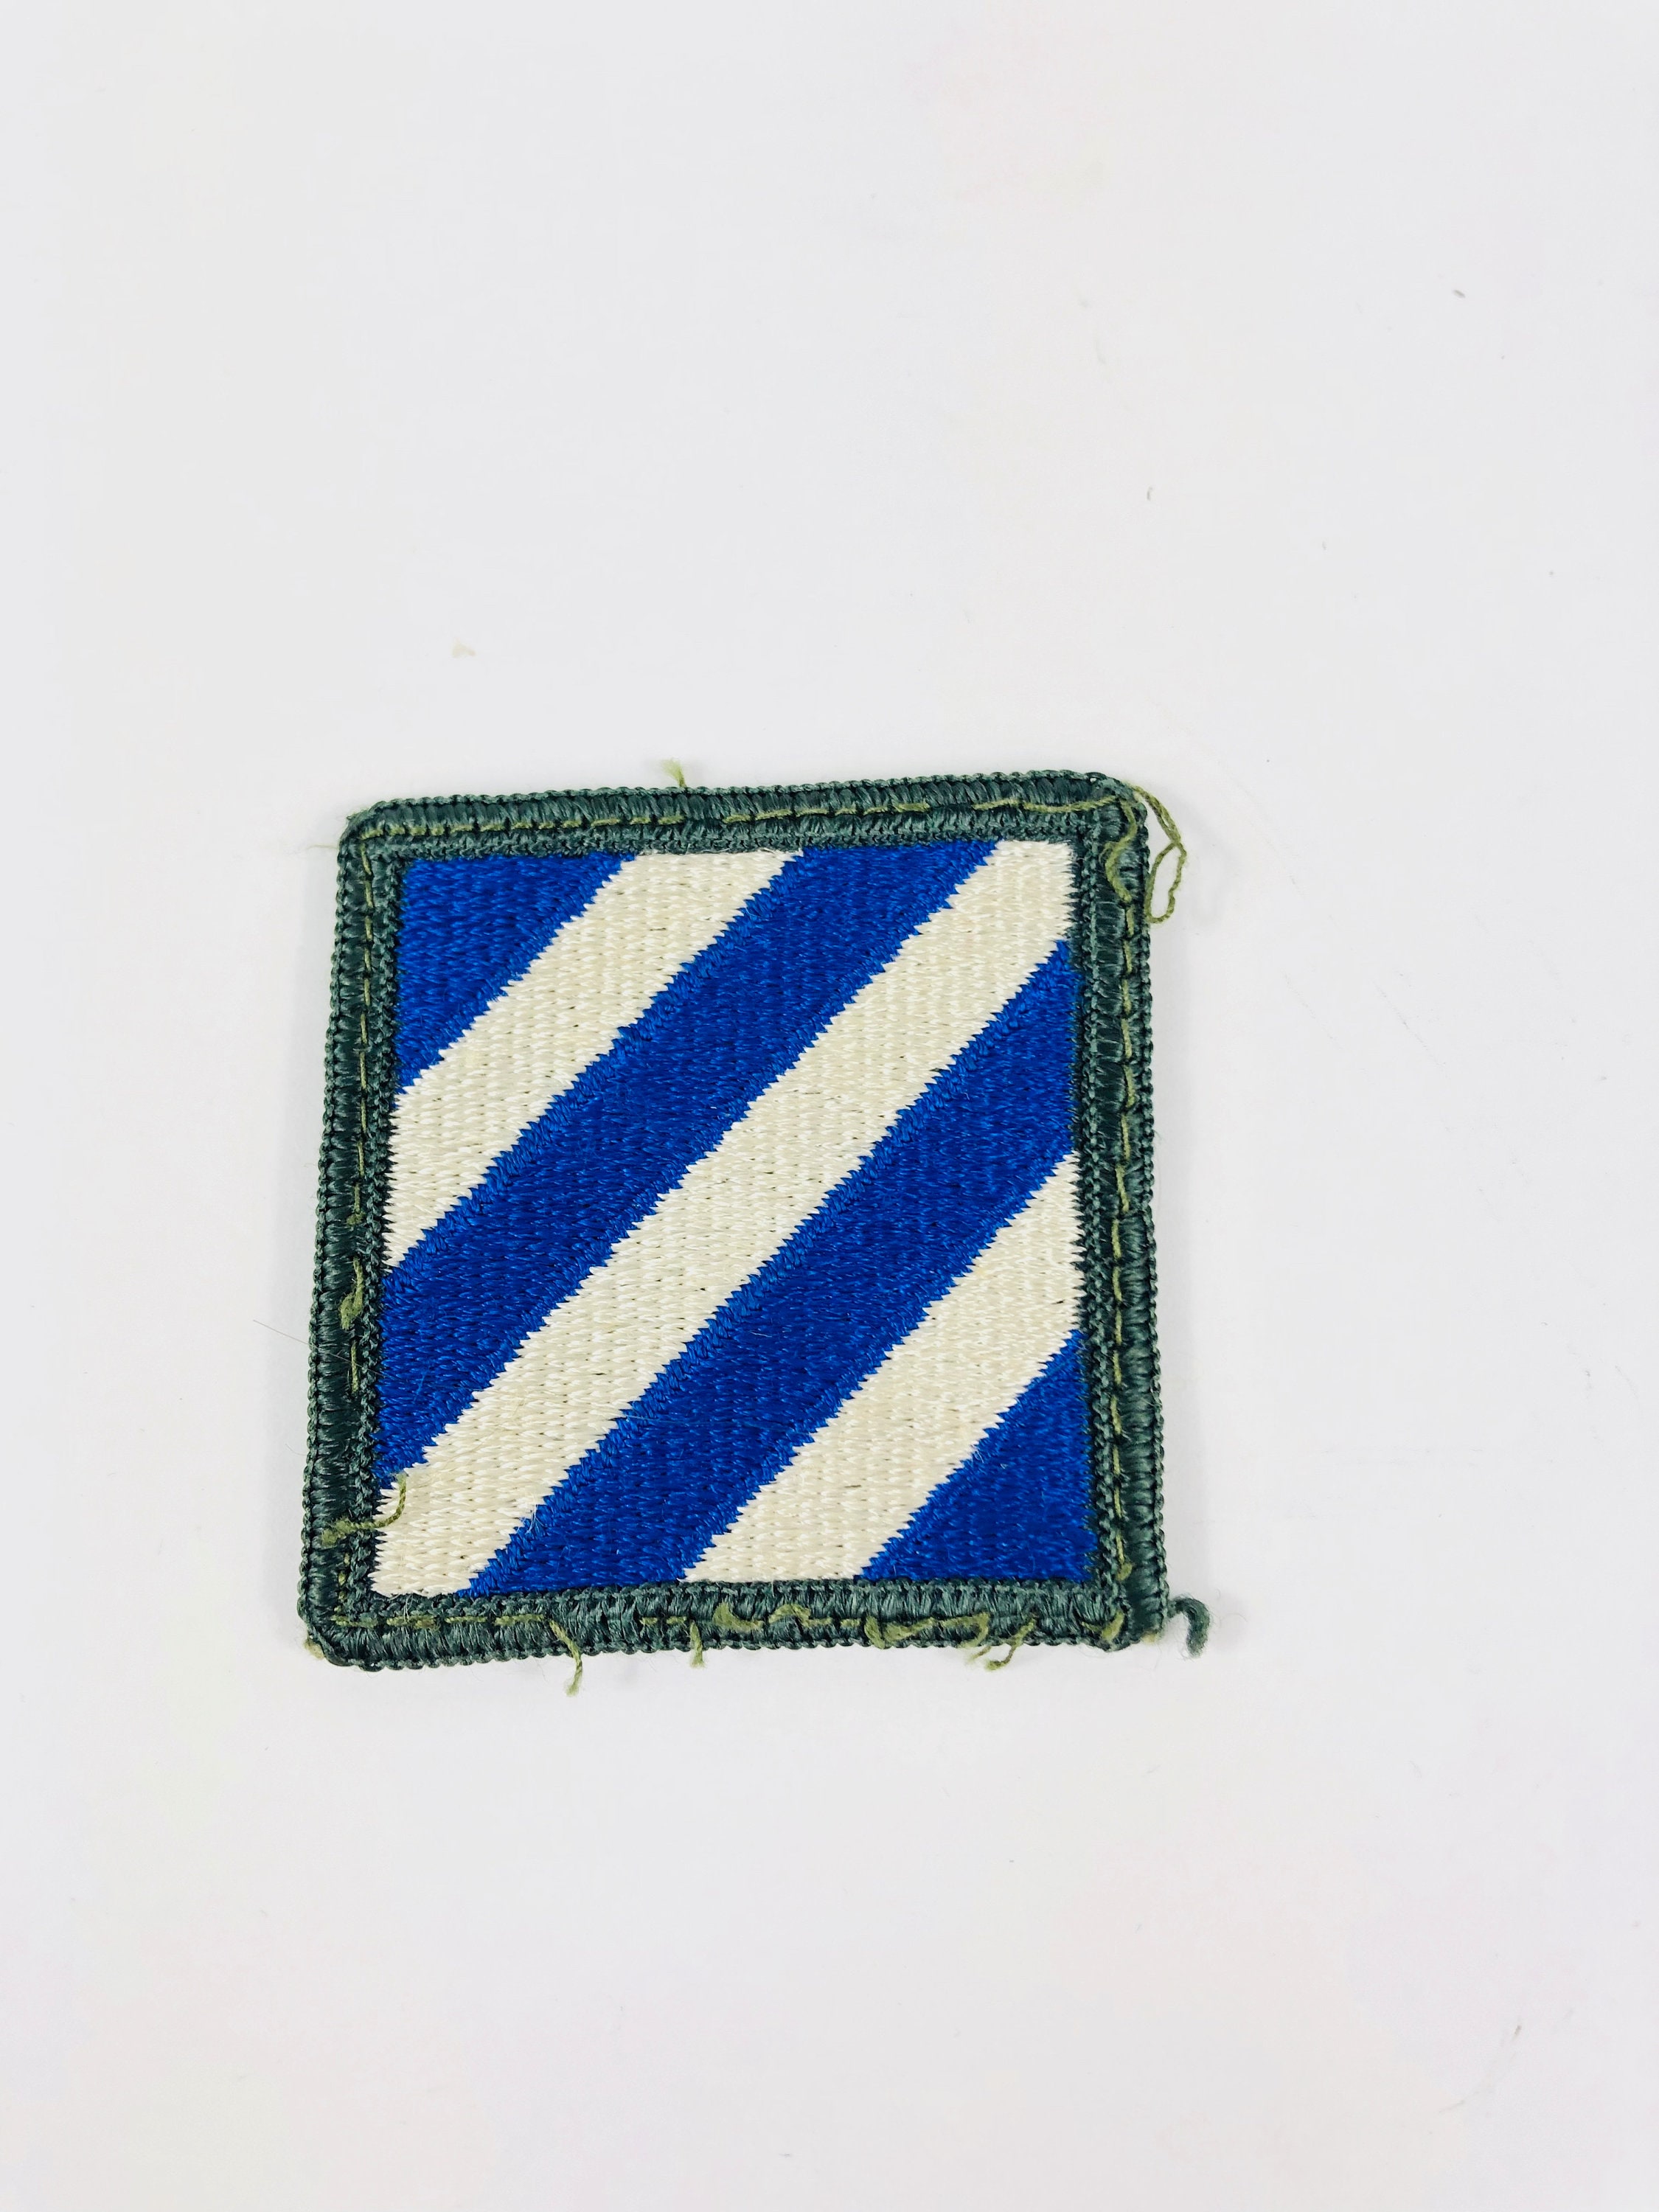 1940s Vintage WWII US Patch US Army Blue and White Striped